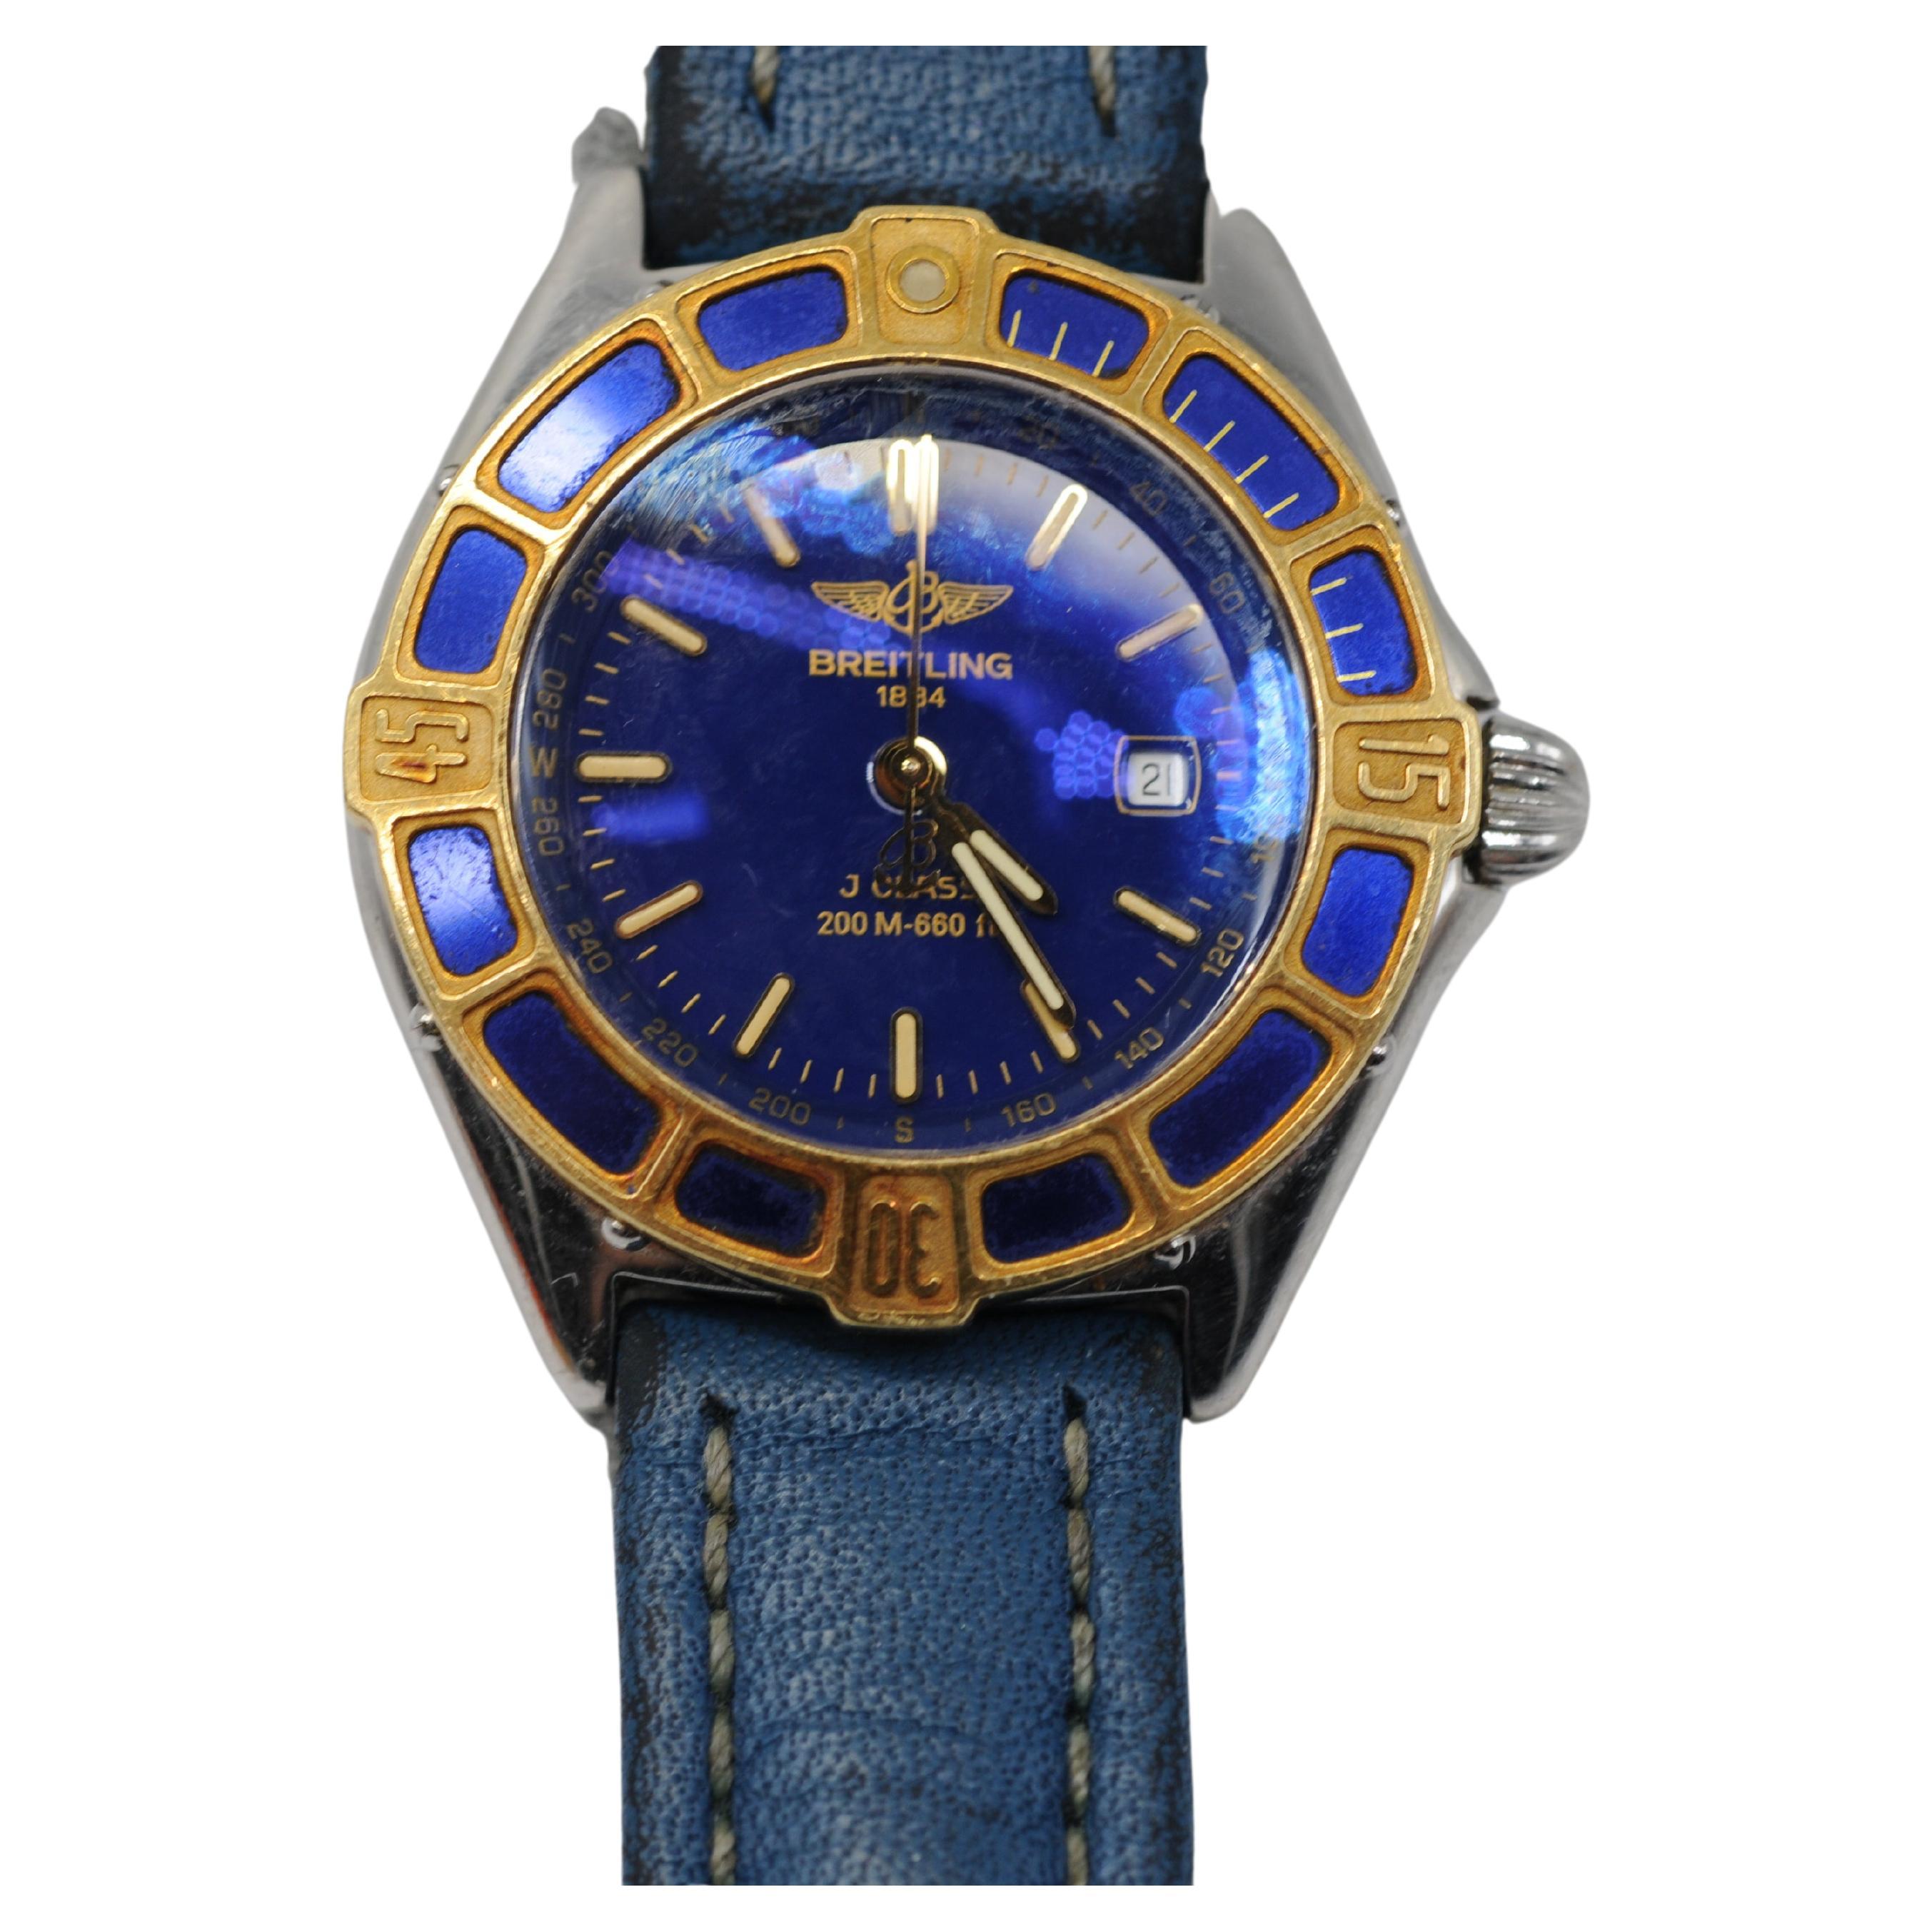 Breitling Lady J D52065 with a deep blue leather strap For Sale